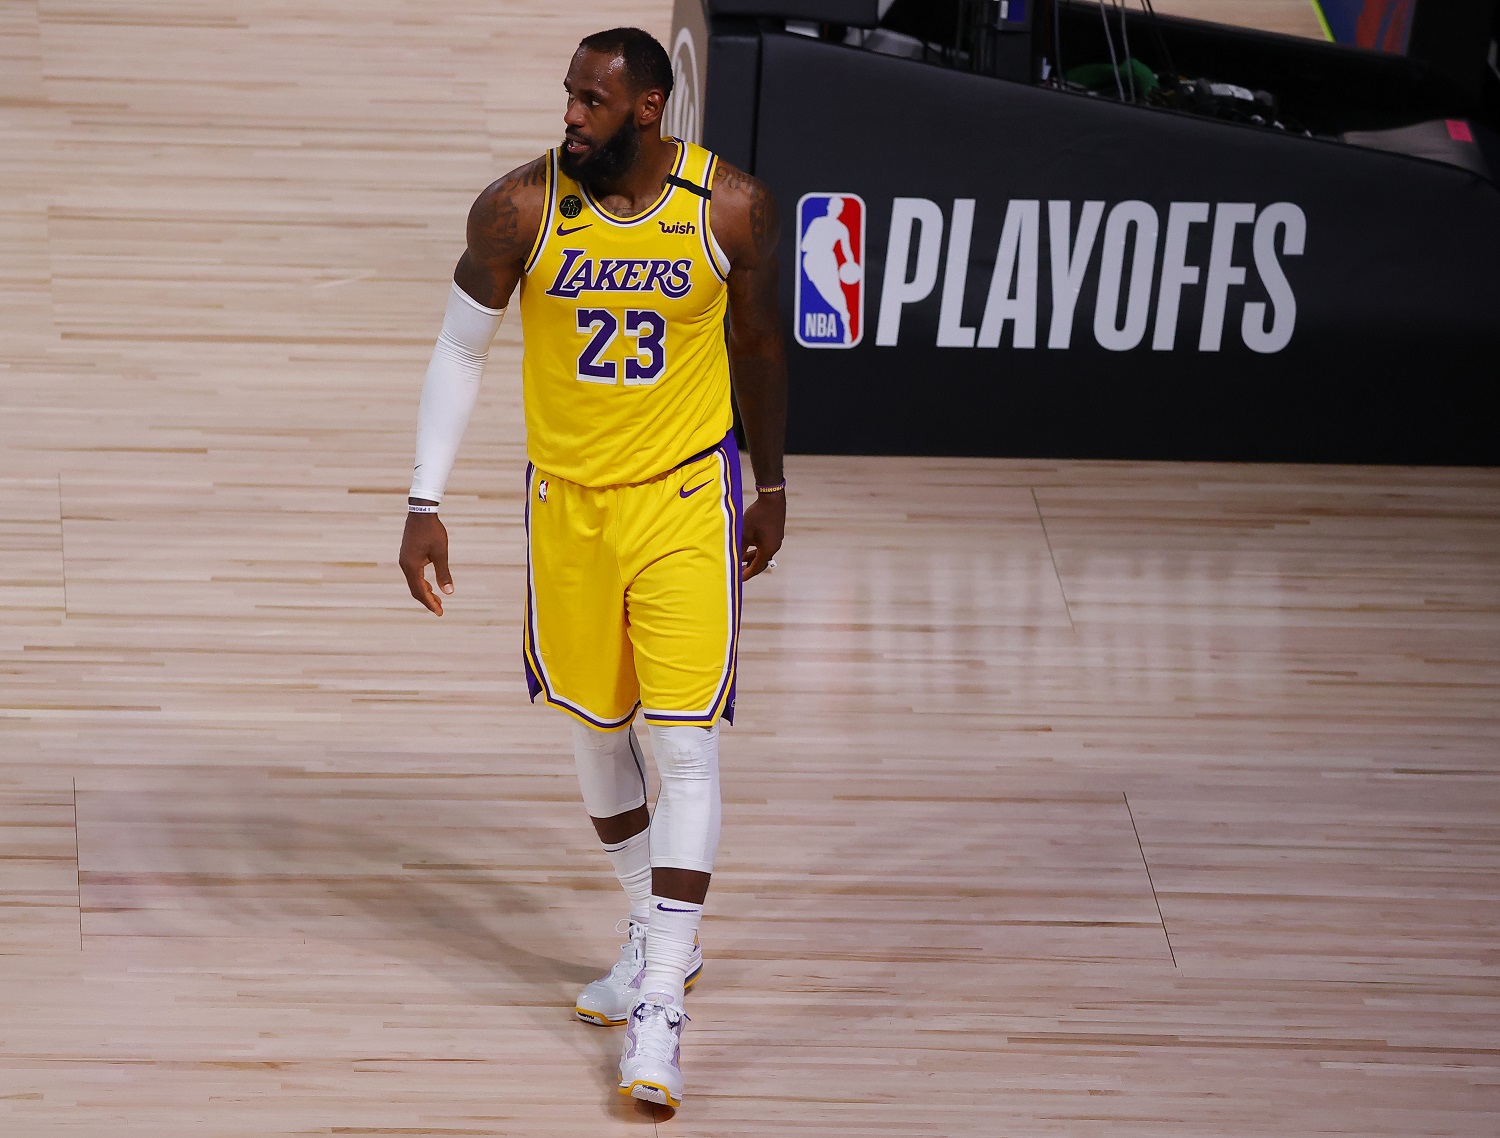 LeBron James Will Need a Special Game To Match the Greatest NBA Finals